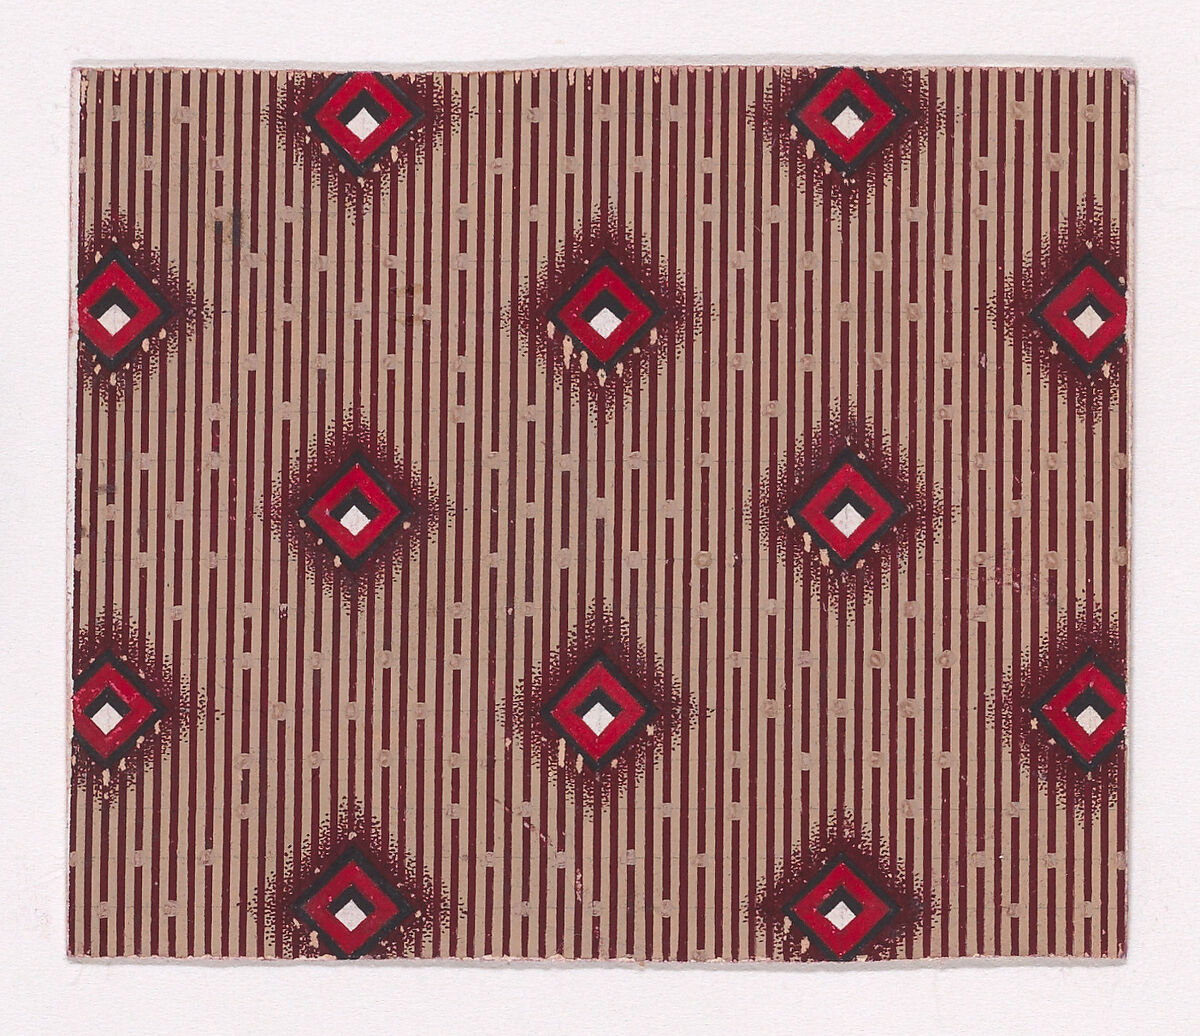 Textile Design with Alternating Lozenges over a Striped Background of Intermittent Lines, Anonymous, Alsatian, 19th century, Gouache 